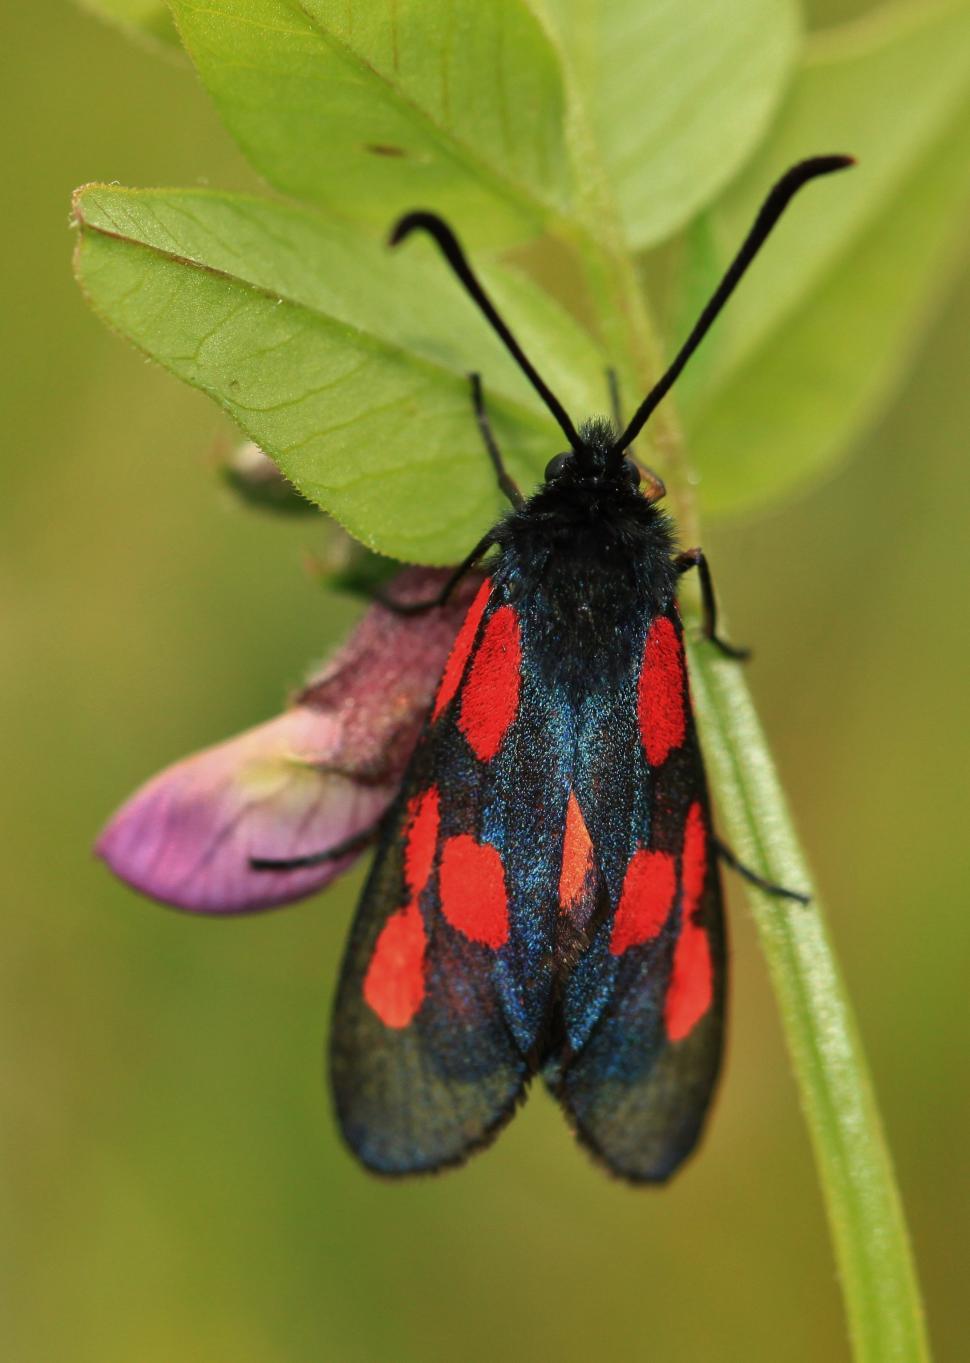 Free Image of Red and Black Insect on Green Leaf 